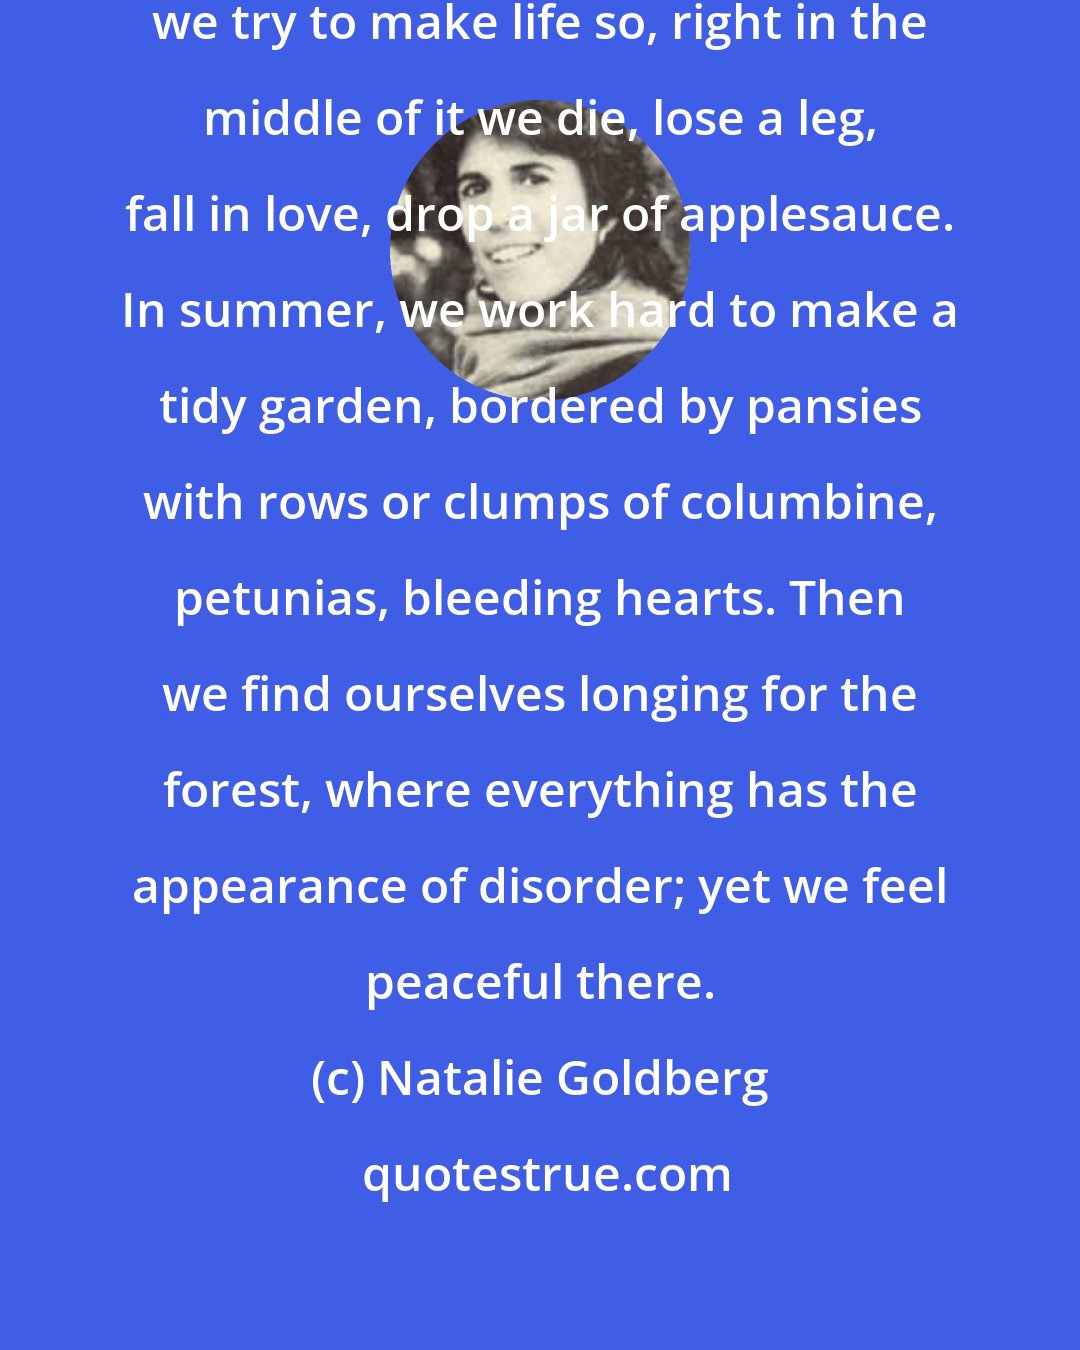 Natalie Goldberg: Life is not orderly. No matter how we try to make life so, right in the middle of it we die, lose a leg, fall in love, drop a jar of applesauce. In summer, we work hard to make a tidy garden, bordered by pansies with rows or clumps of columbine, petunias, bleeding hearts. Then we find ourselves longing for the forest, where everything has the appearance of disorder; yet we feel peaceful there.